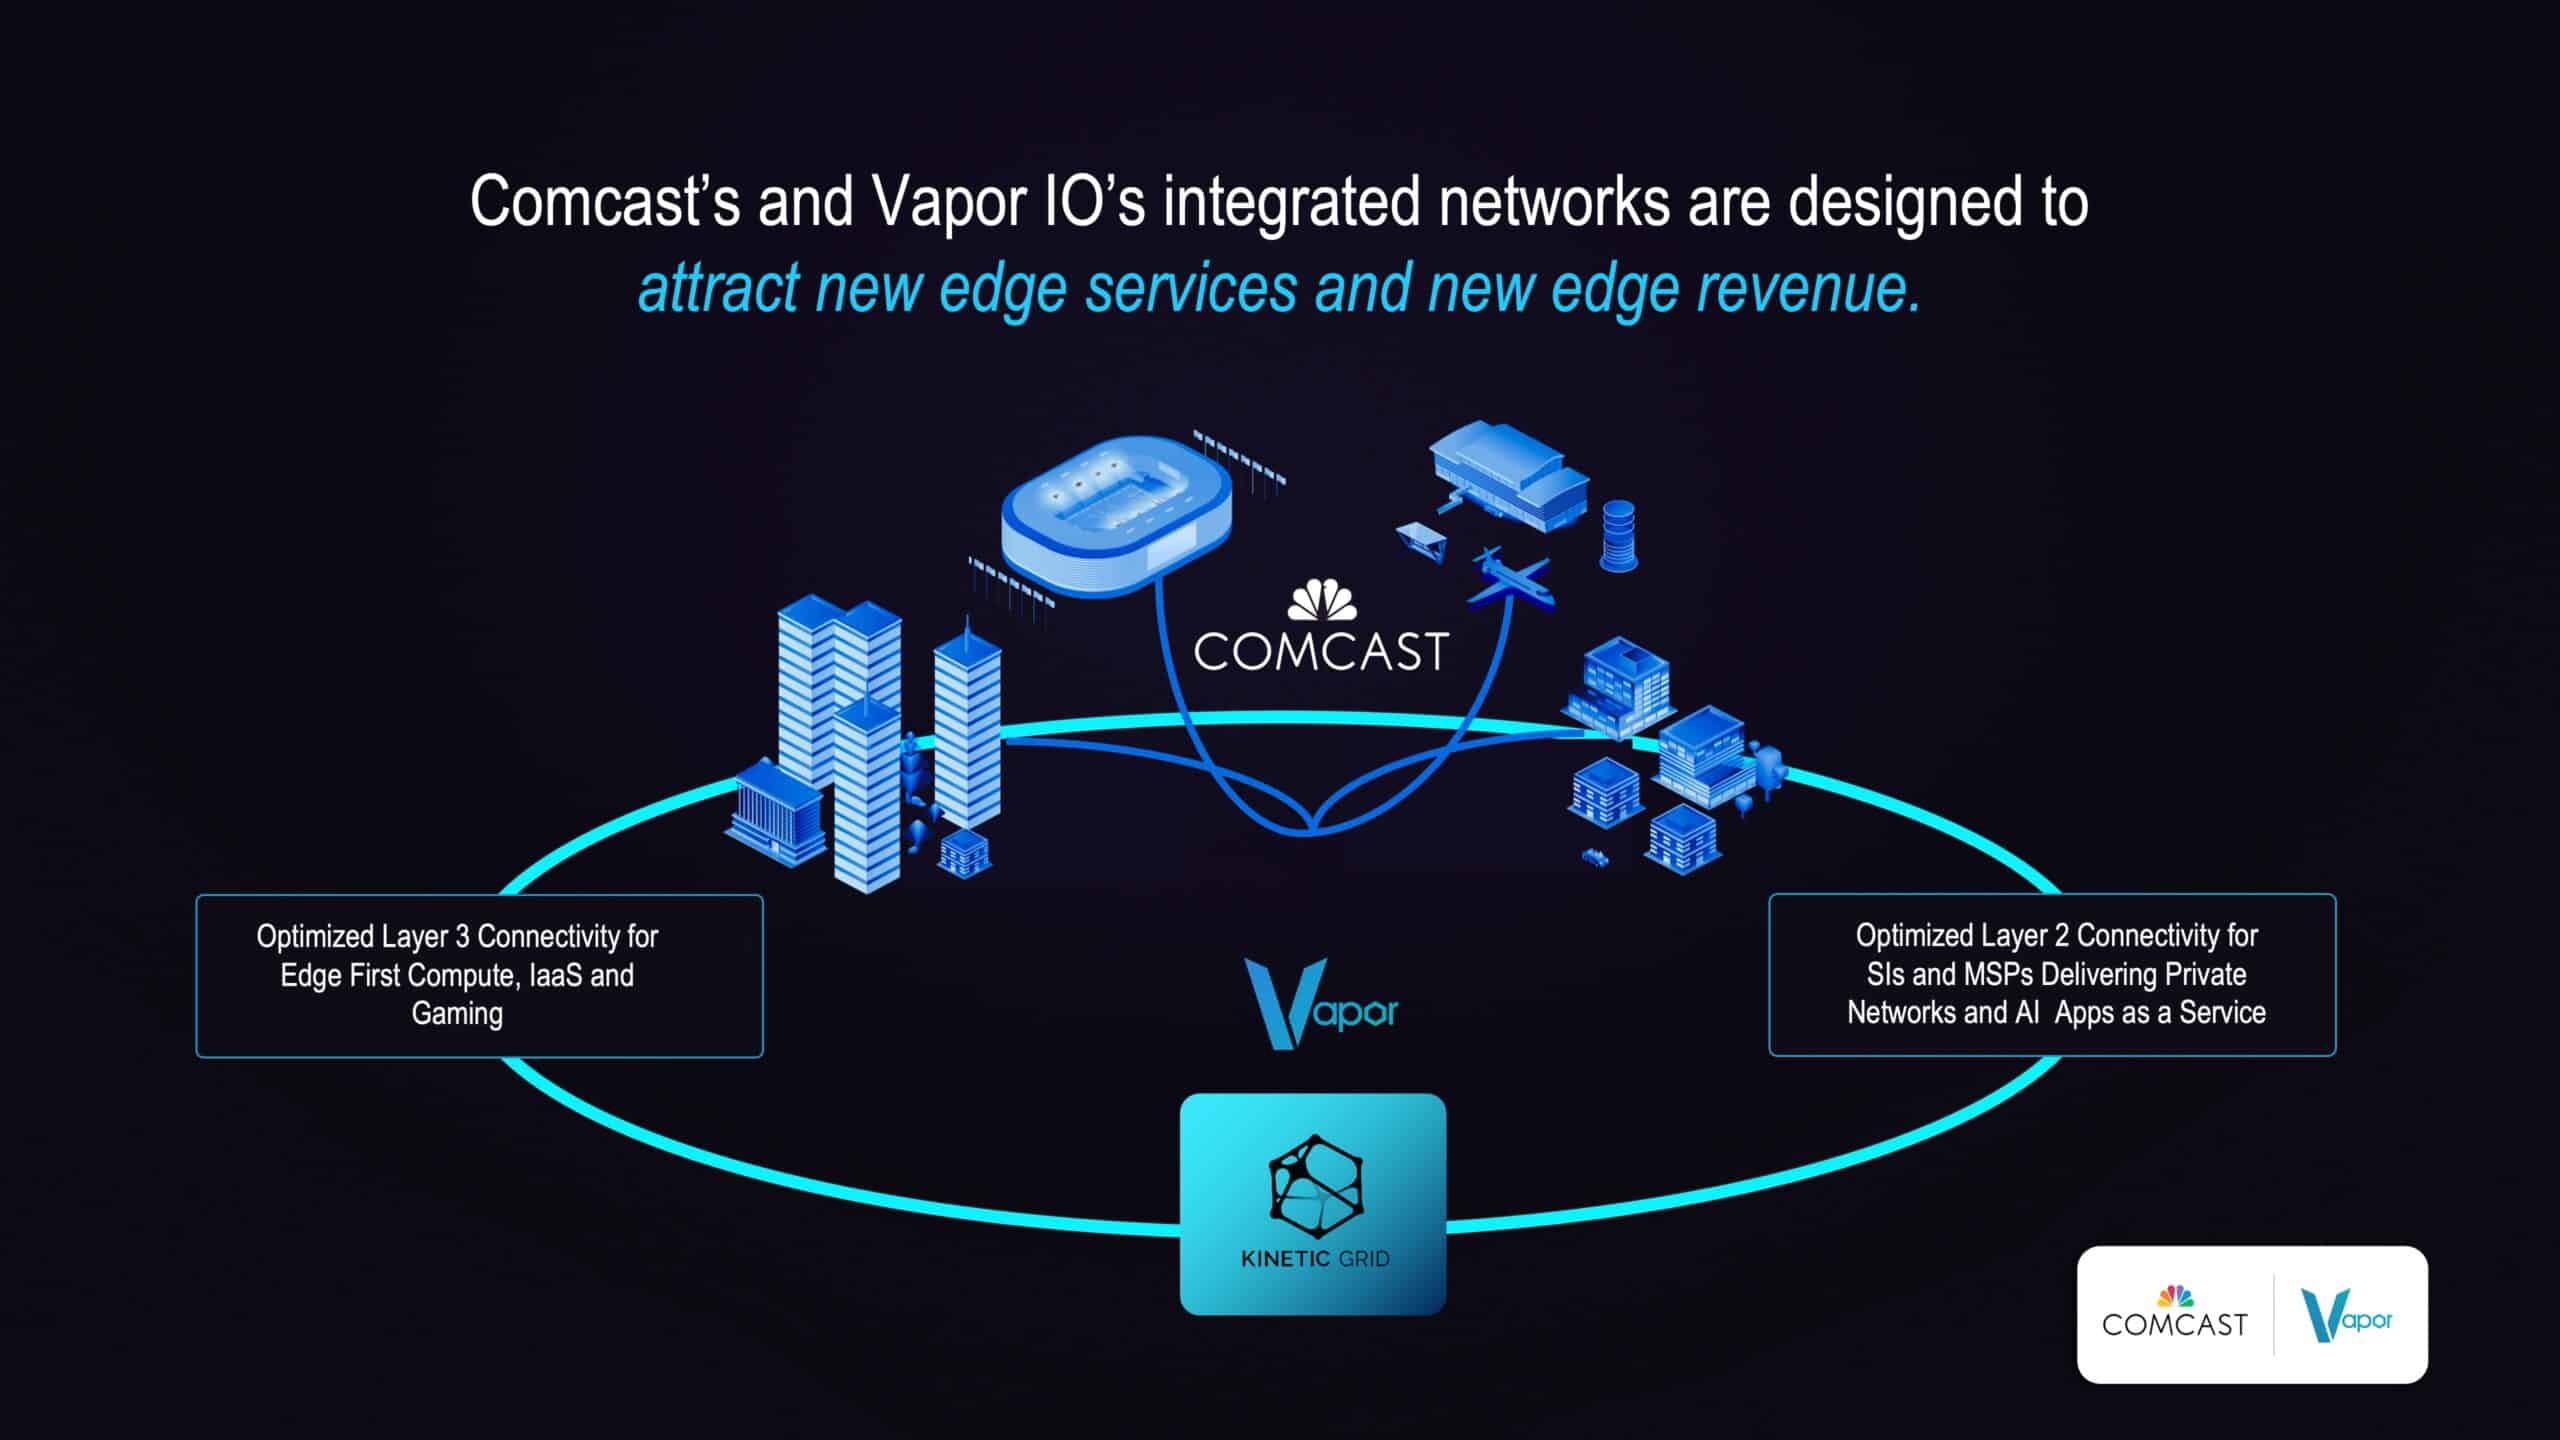 A high-level architecture diagram showing how Vapor IO's Kinetic Grid and Comcast's network are being integrated